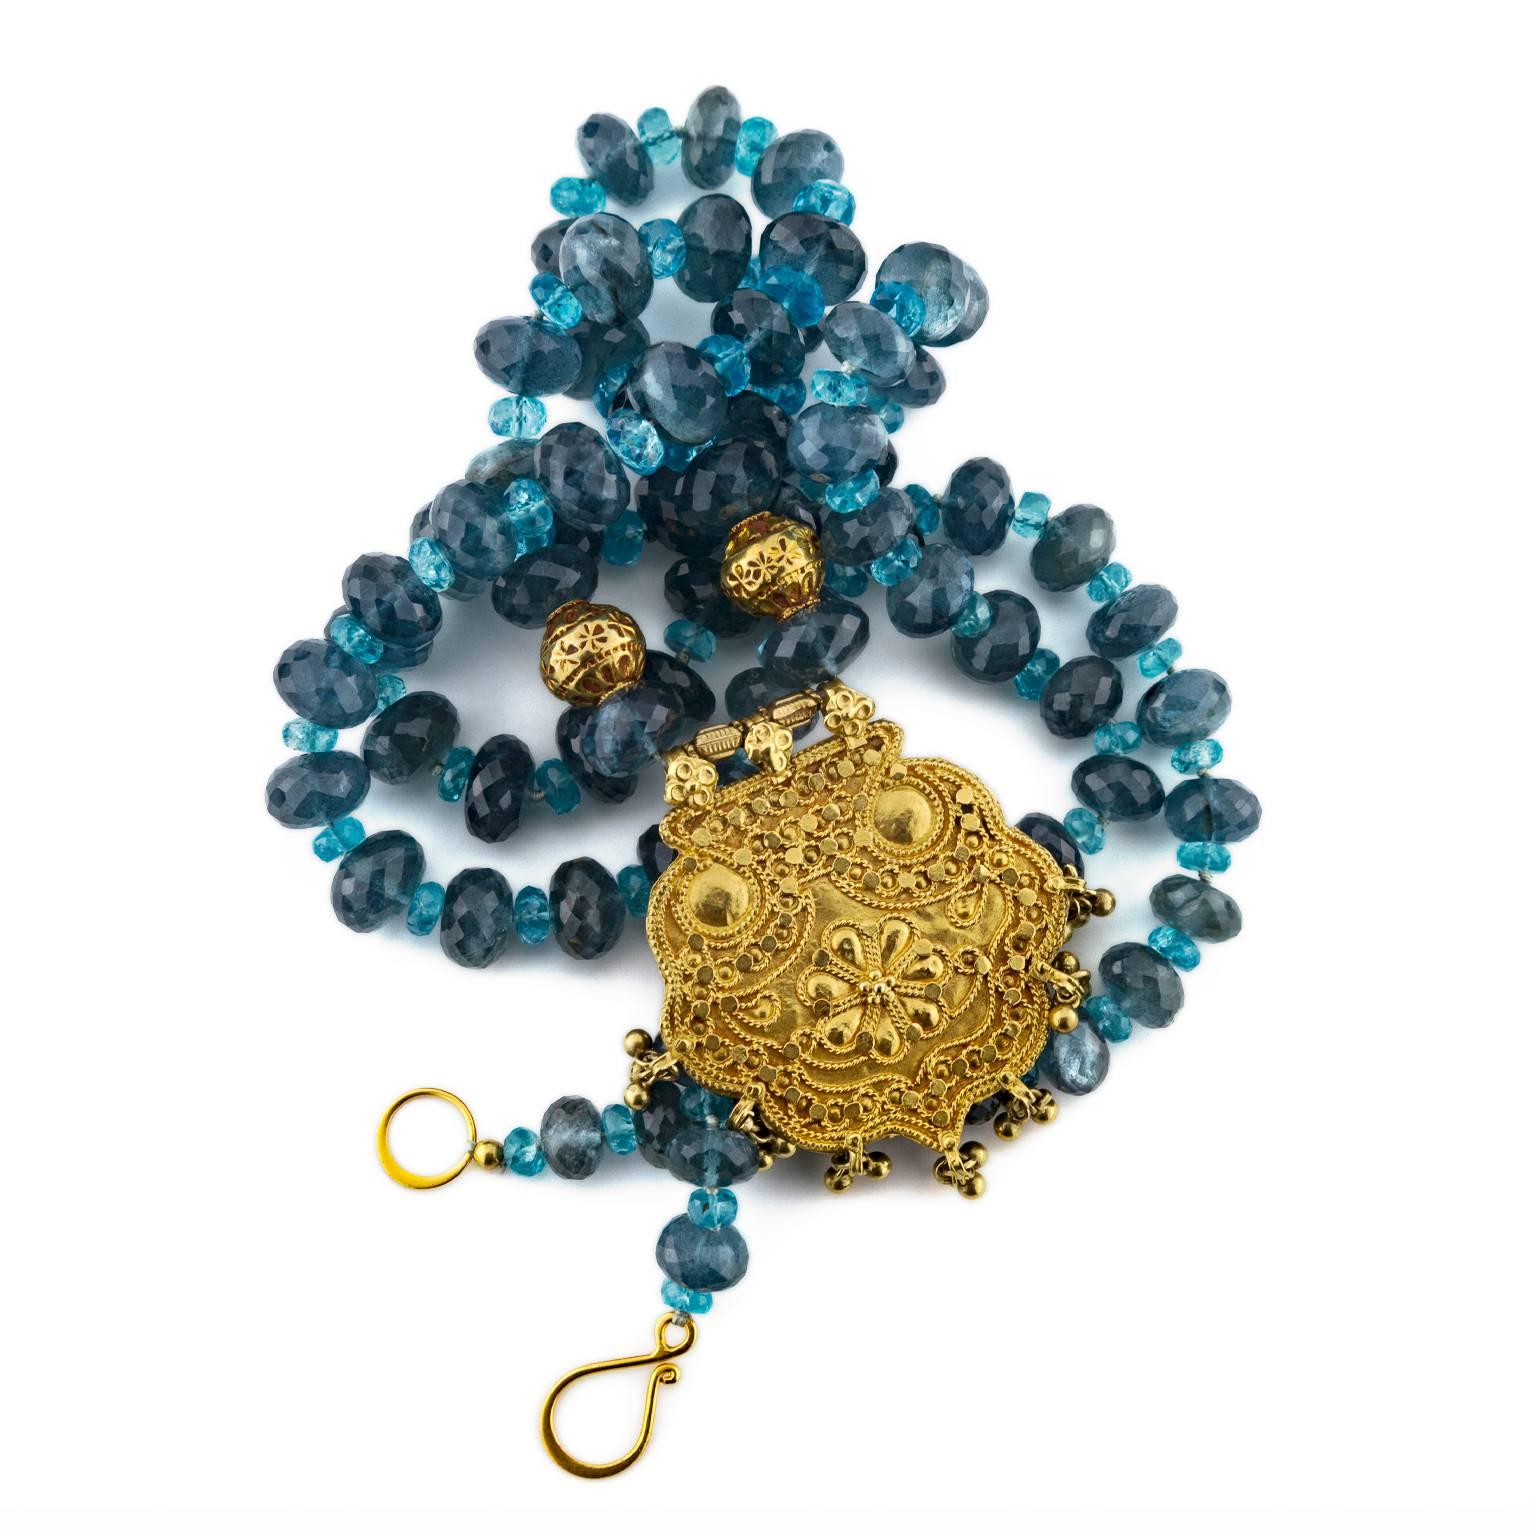 Women's Moss Aquamarine Apatite Beaded Necklace with Gold Medallion